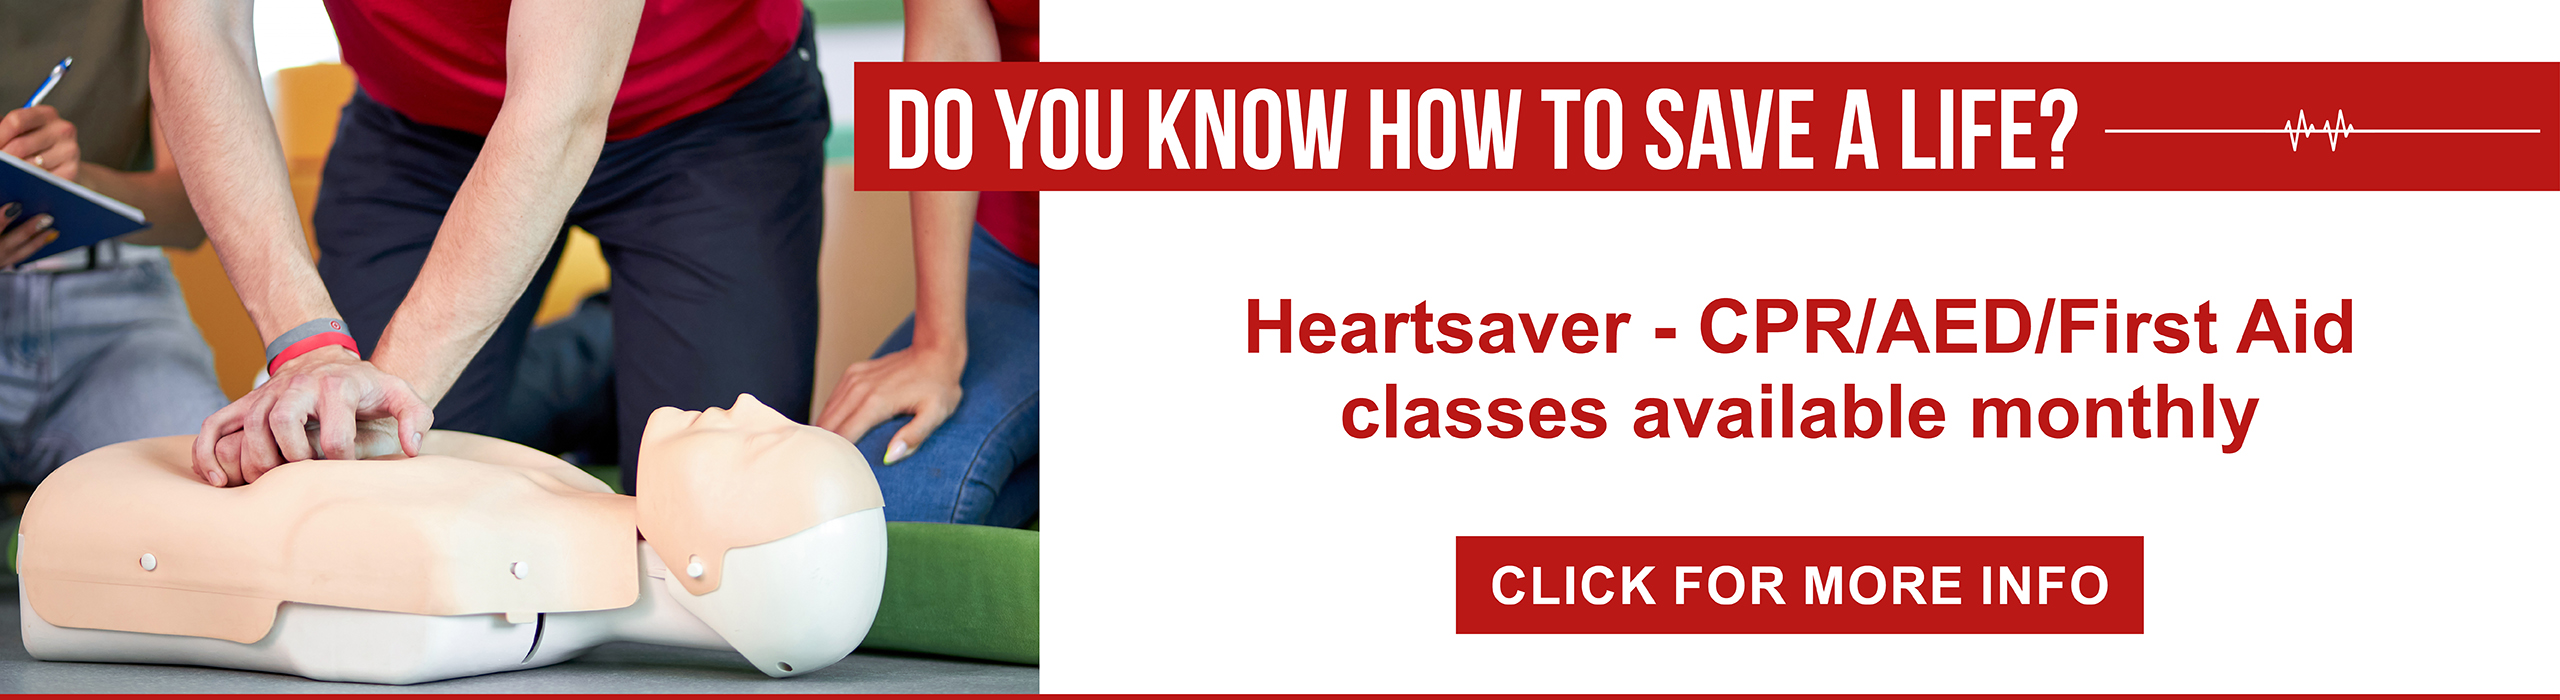 Heartsaver- CPR-AED-First Aid
Classes Available
Next class will be held 8am-4pm 
October 31, 2022

For more information or to sign up for a class, contact Krystyna at 208-983-8561

If you are not able to attend a scheduled class you can take the online course from AHA and have any instructor do the hands on skills check, which takes about 30 minutes.

Do you know how to save a life?